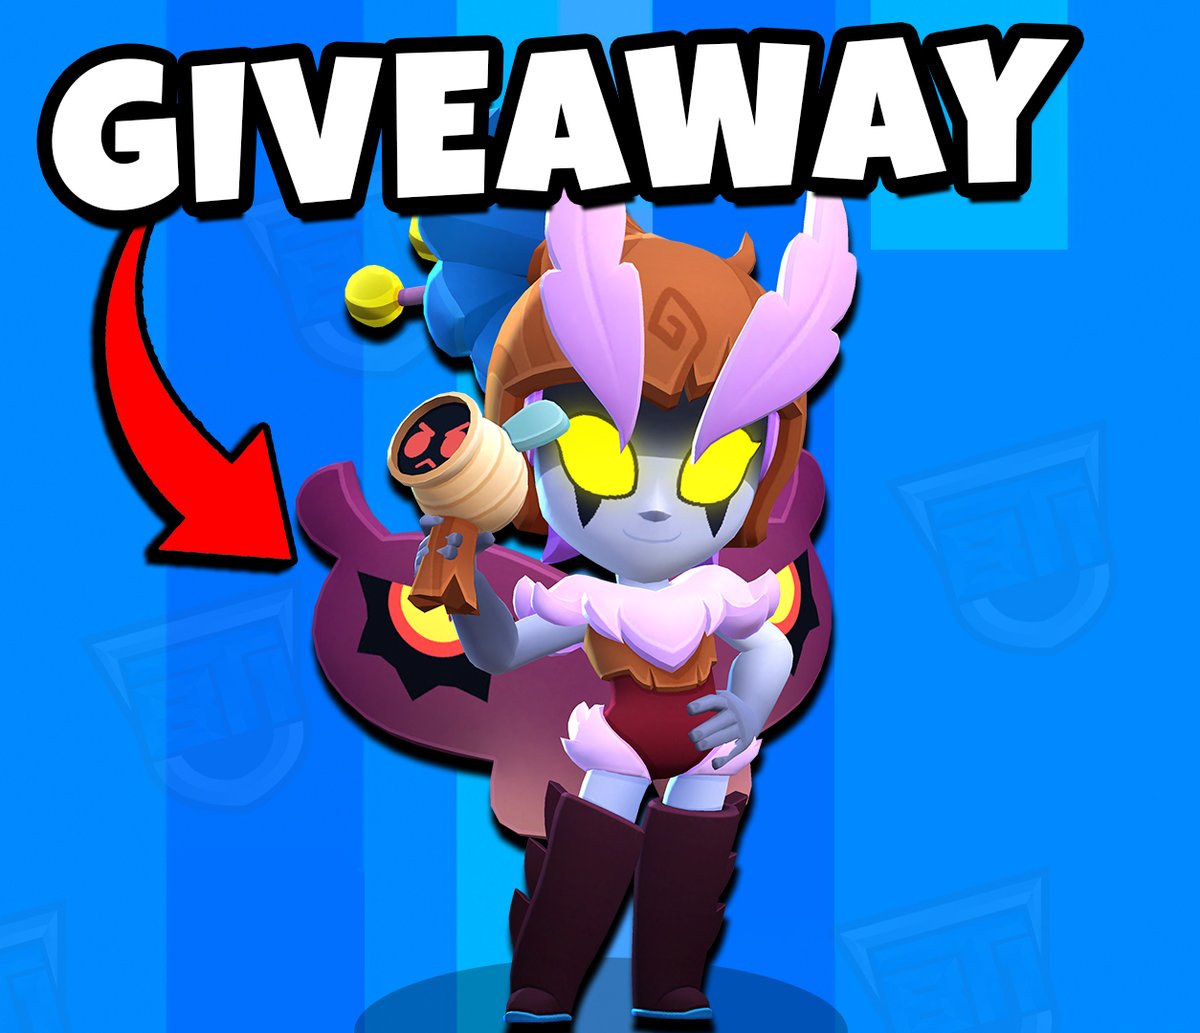 Im giving away X6 Dark Fairy Janet Skins courtesy of @BrawlStars 

To enter:   
✅Follow @Bentimm1
📷 Reply fav thing about this update!📲

Winners picked July 1st! #DarkFairyJanetGiveaway